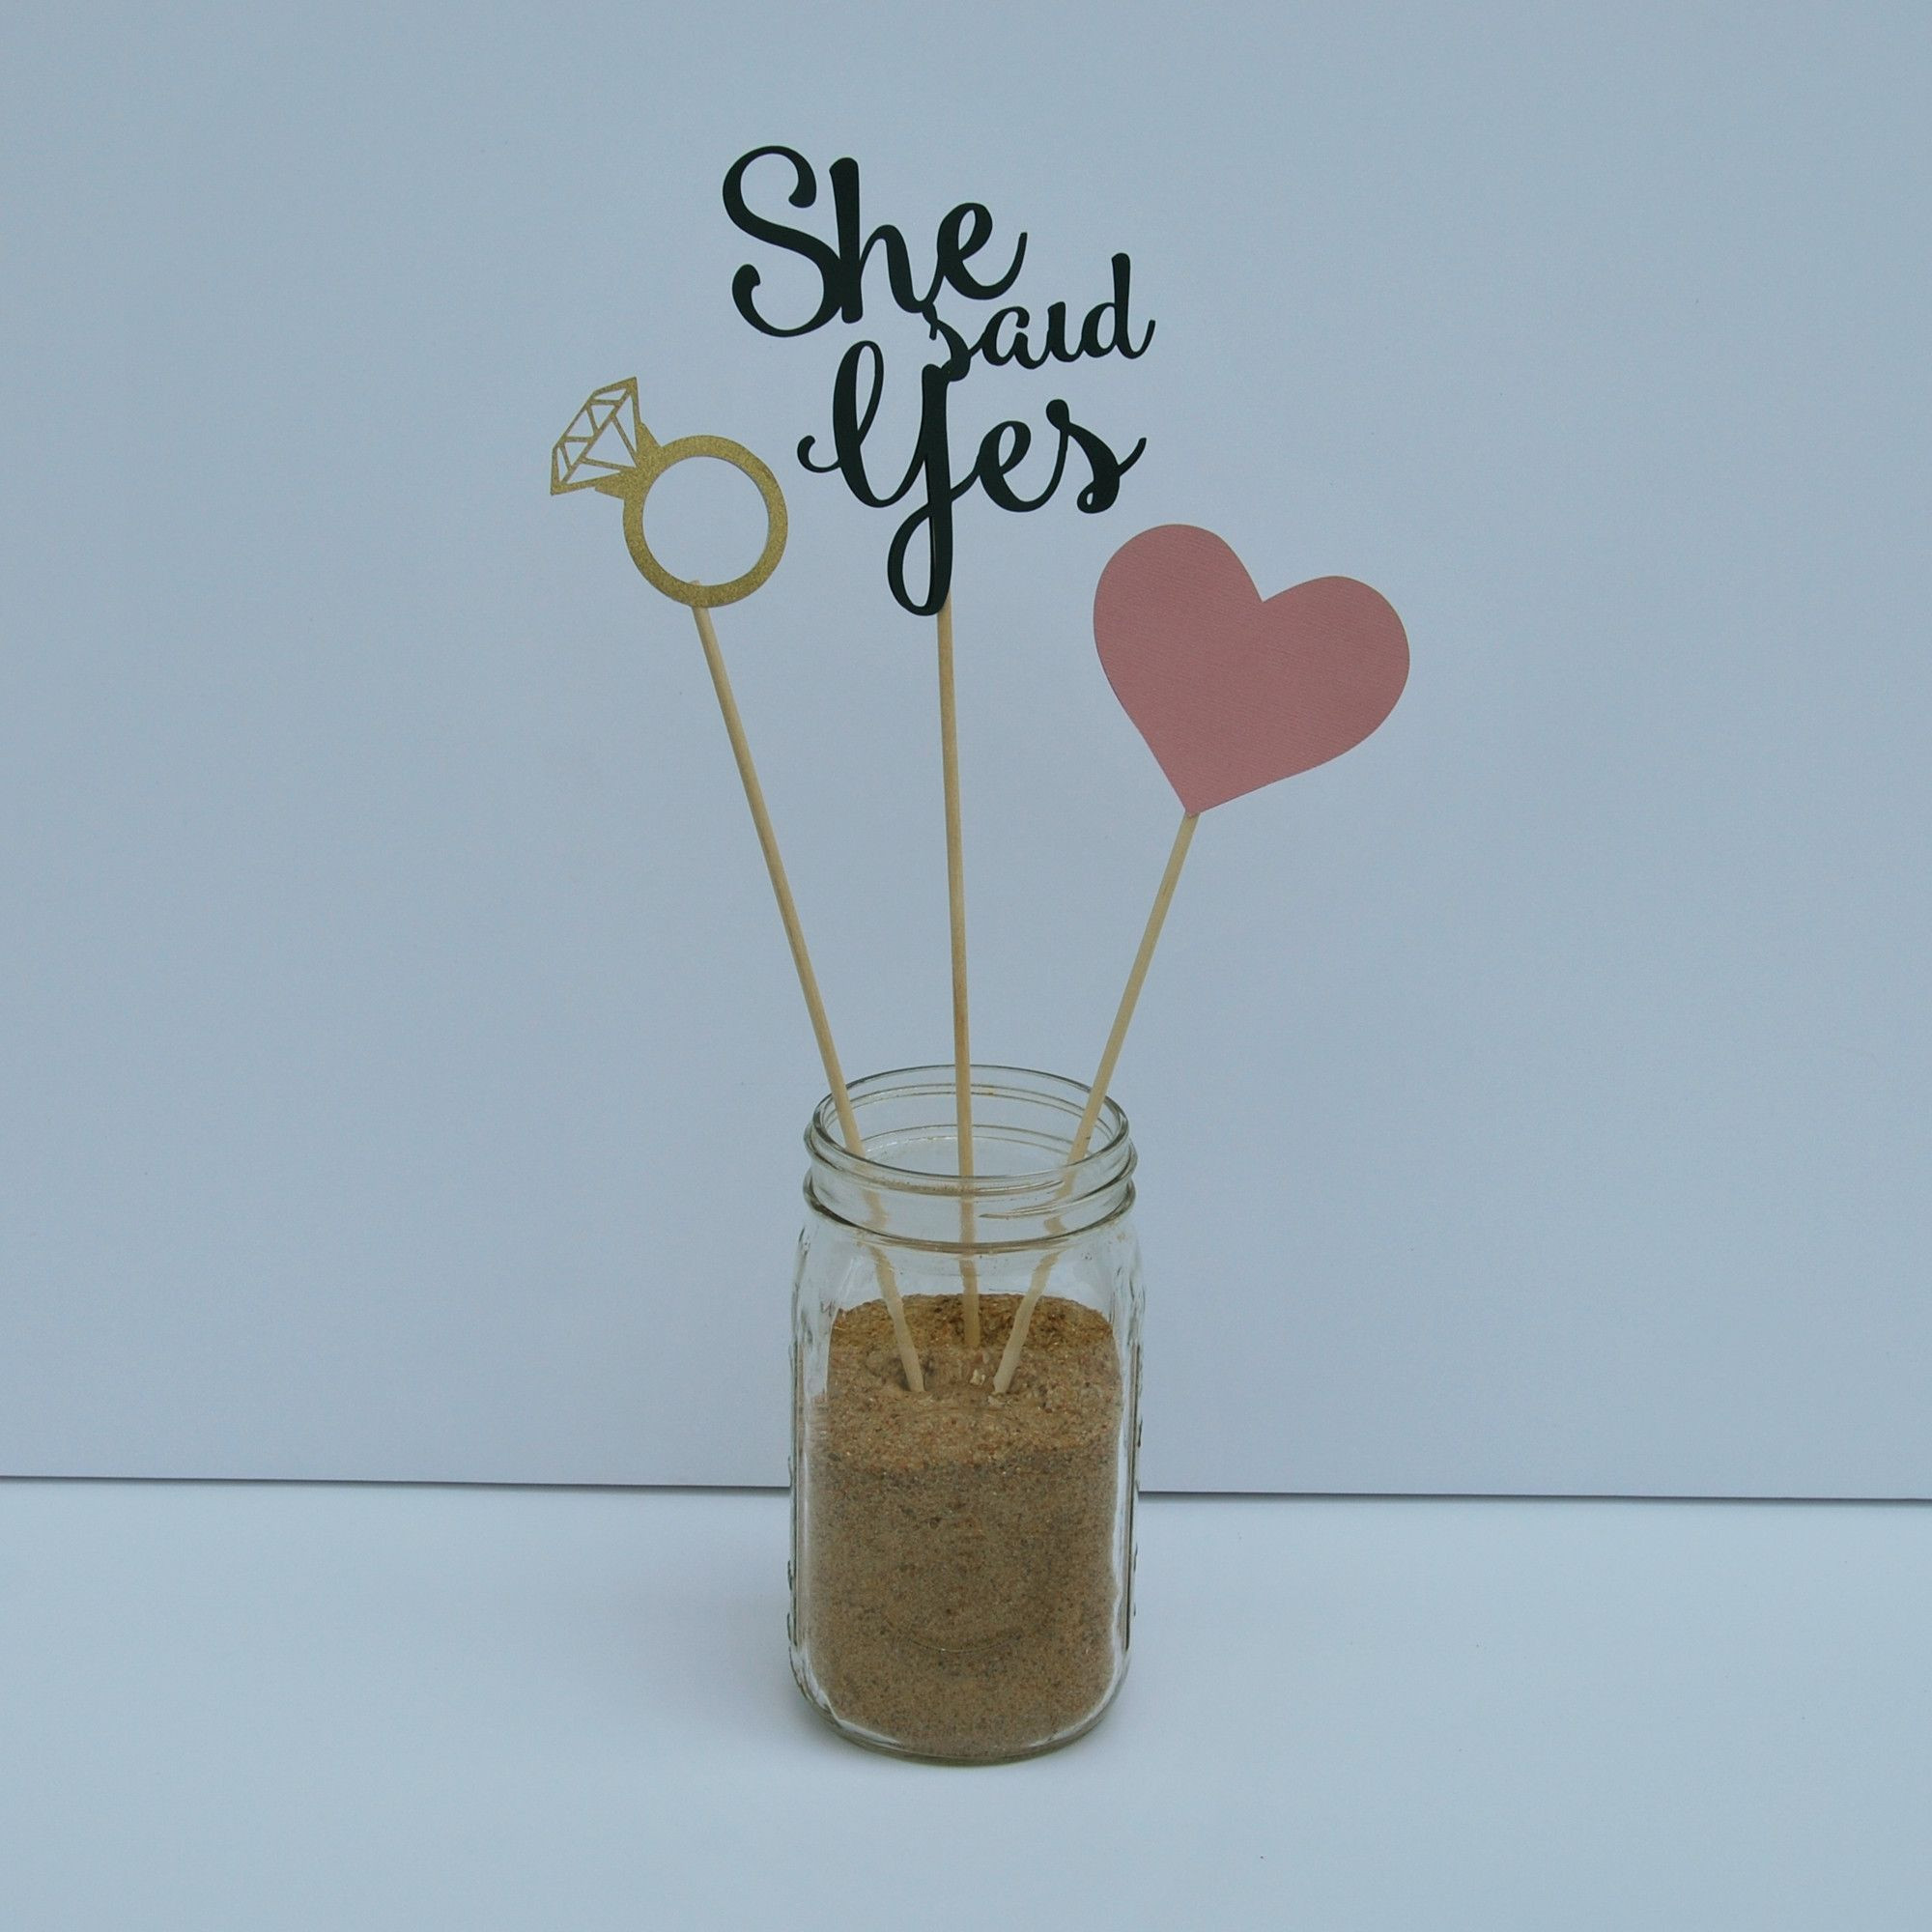 Cute Ideas For Engagement Party
 "She Said Yes" Engagement Party Centerpiece for Pinterest